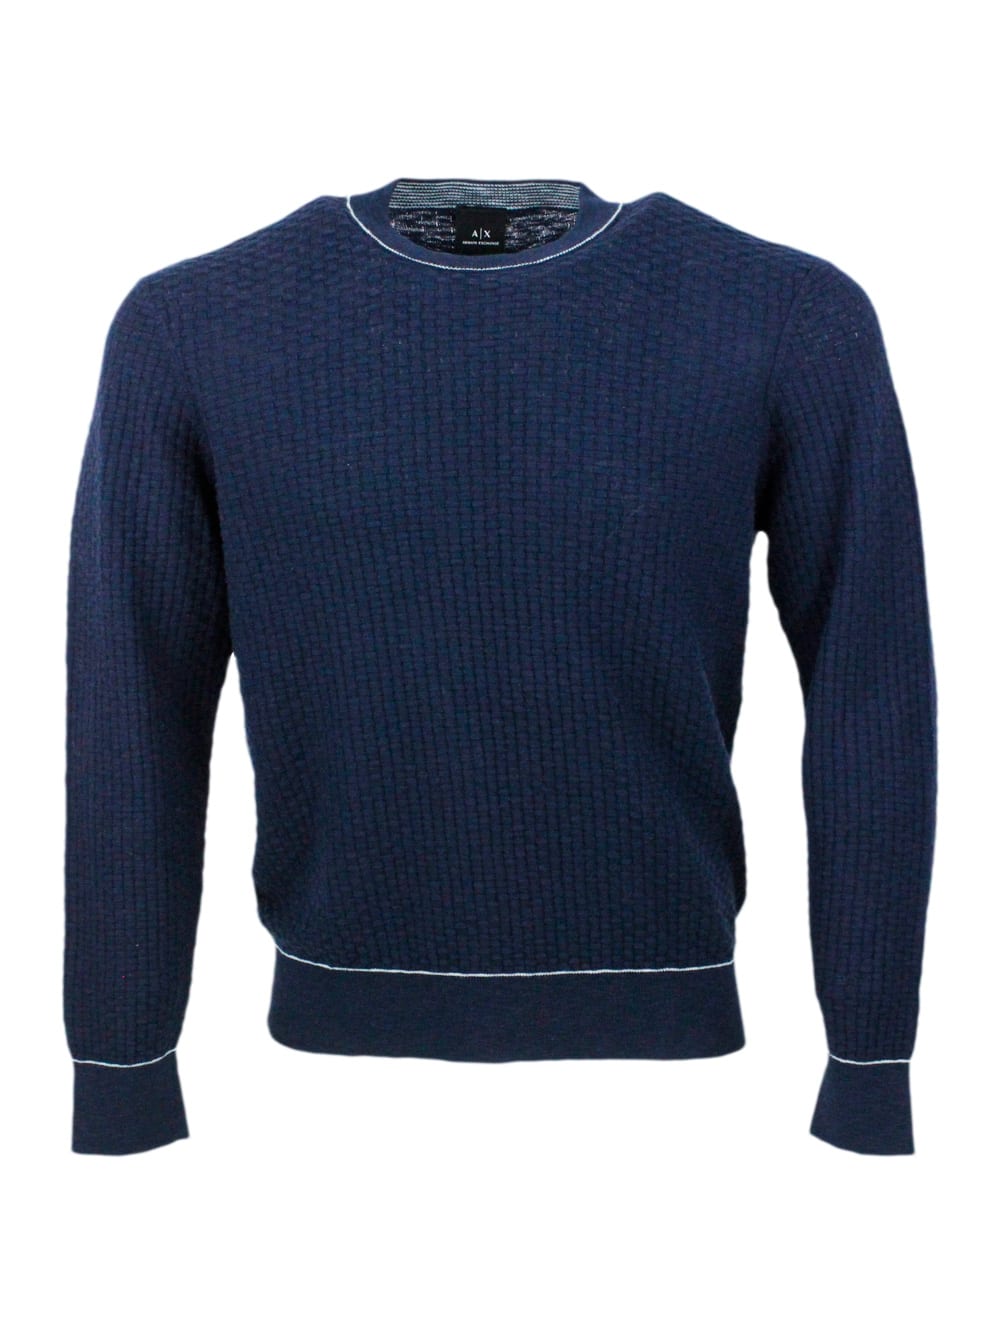 Crew-neck And Long-sleeved Sweater In Cotton And Linen With Honeycomb Workmanship.